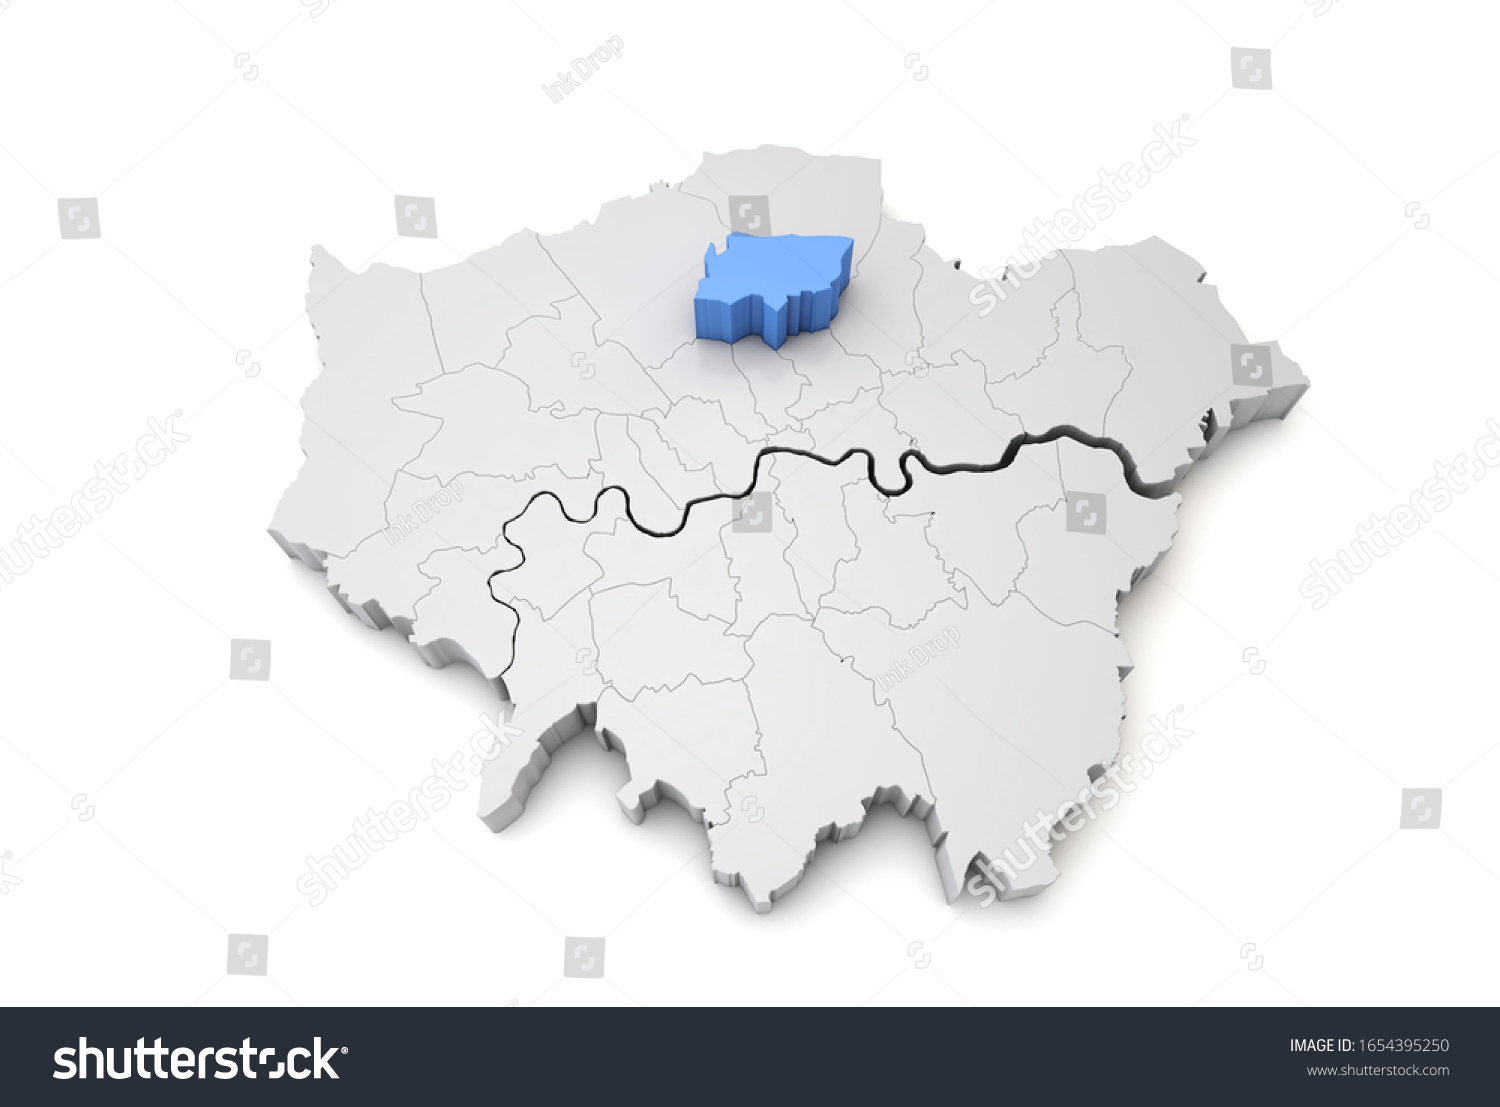 Stock Photo Greater London Map Showing Haringey Borough In Blue D Rendering 1654395250 